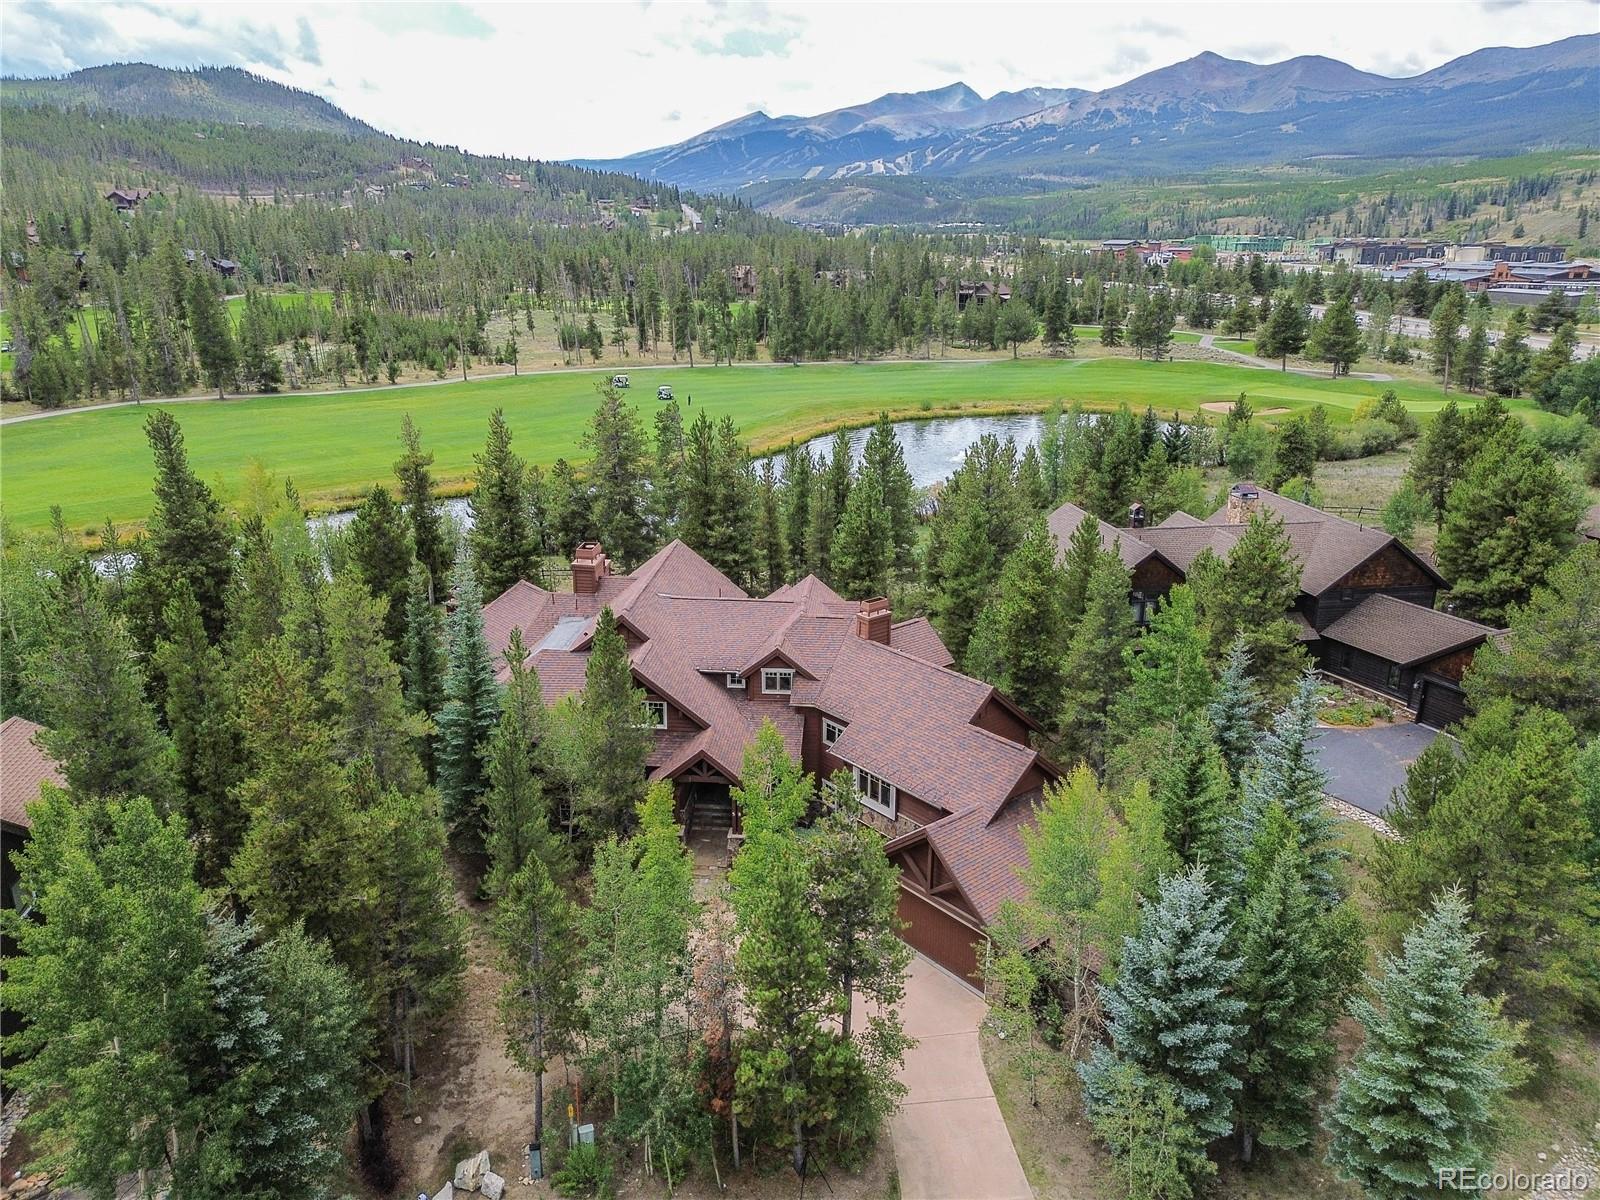 38  marksberry way, Breckenridge sold home. Closed on 2024-04-19 for $3,100,000.